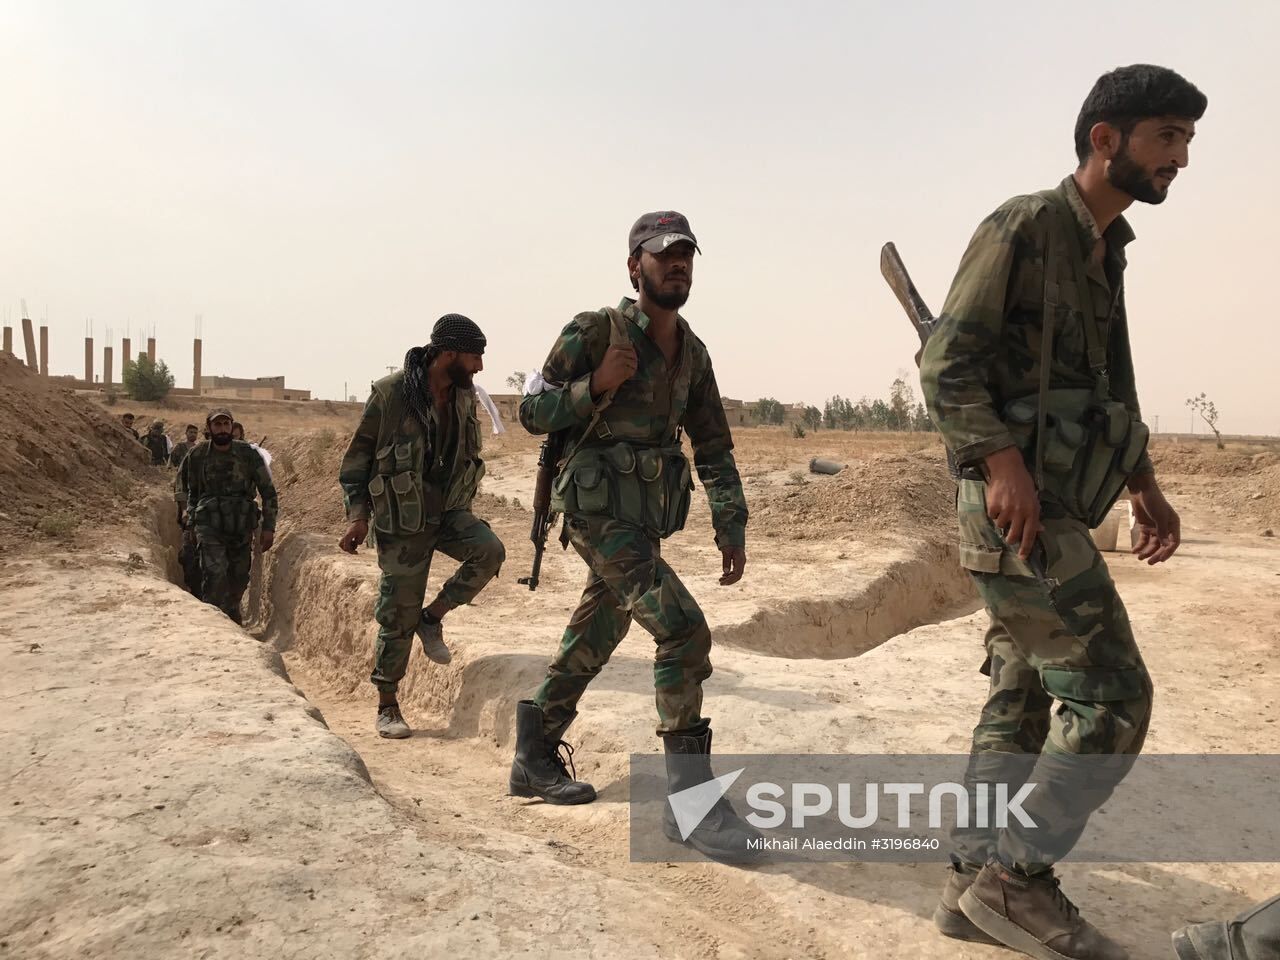 Syrian army and people's militia during offensive operation near al-Jafra in Deir-ez-Zor